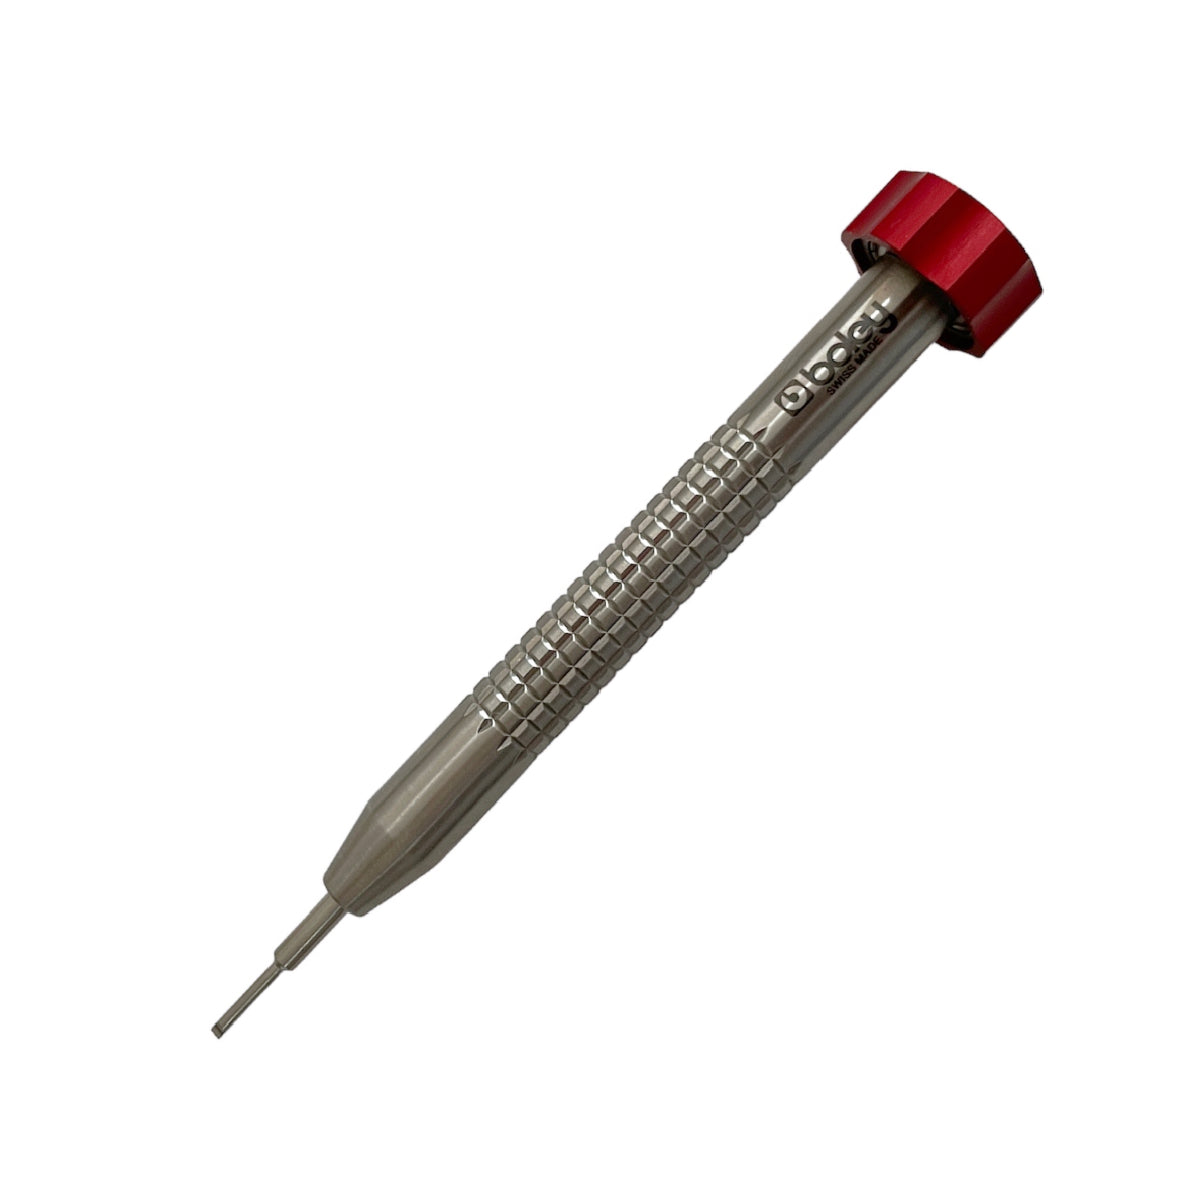 Watchmaker's screwdriver. Basic Watch Tools 